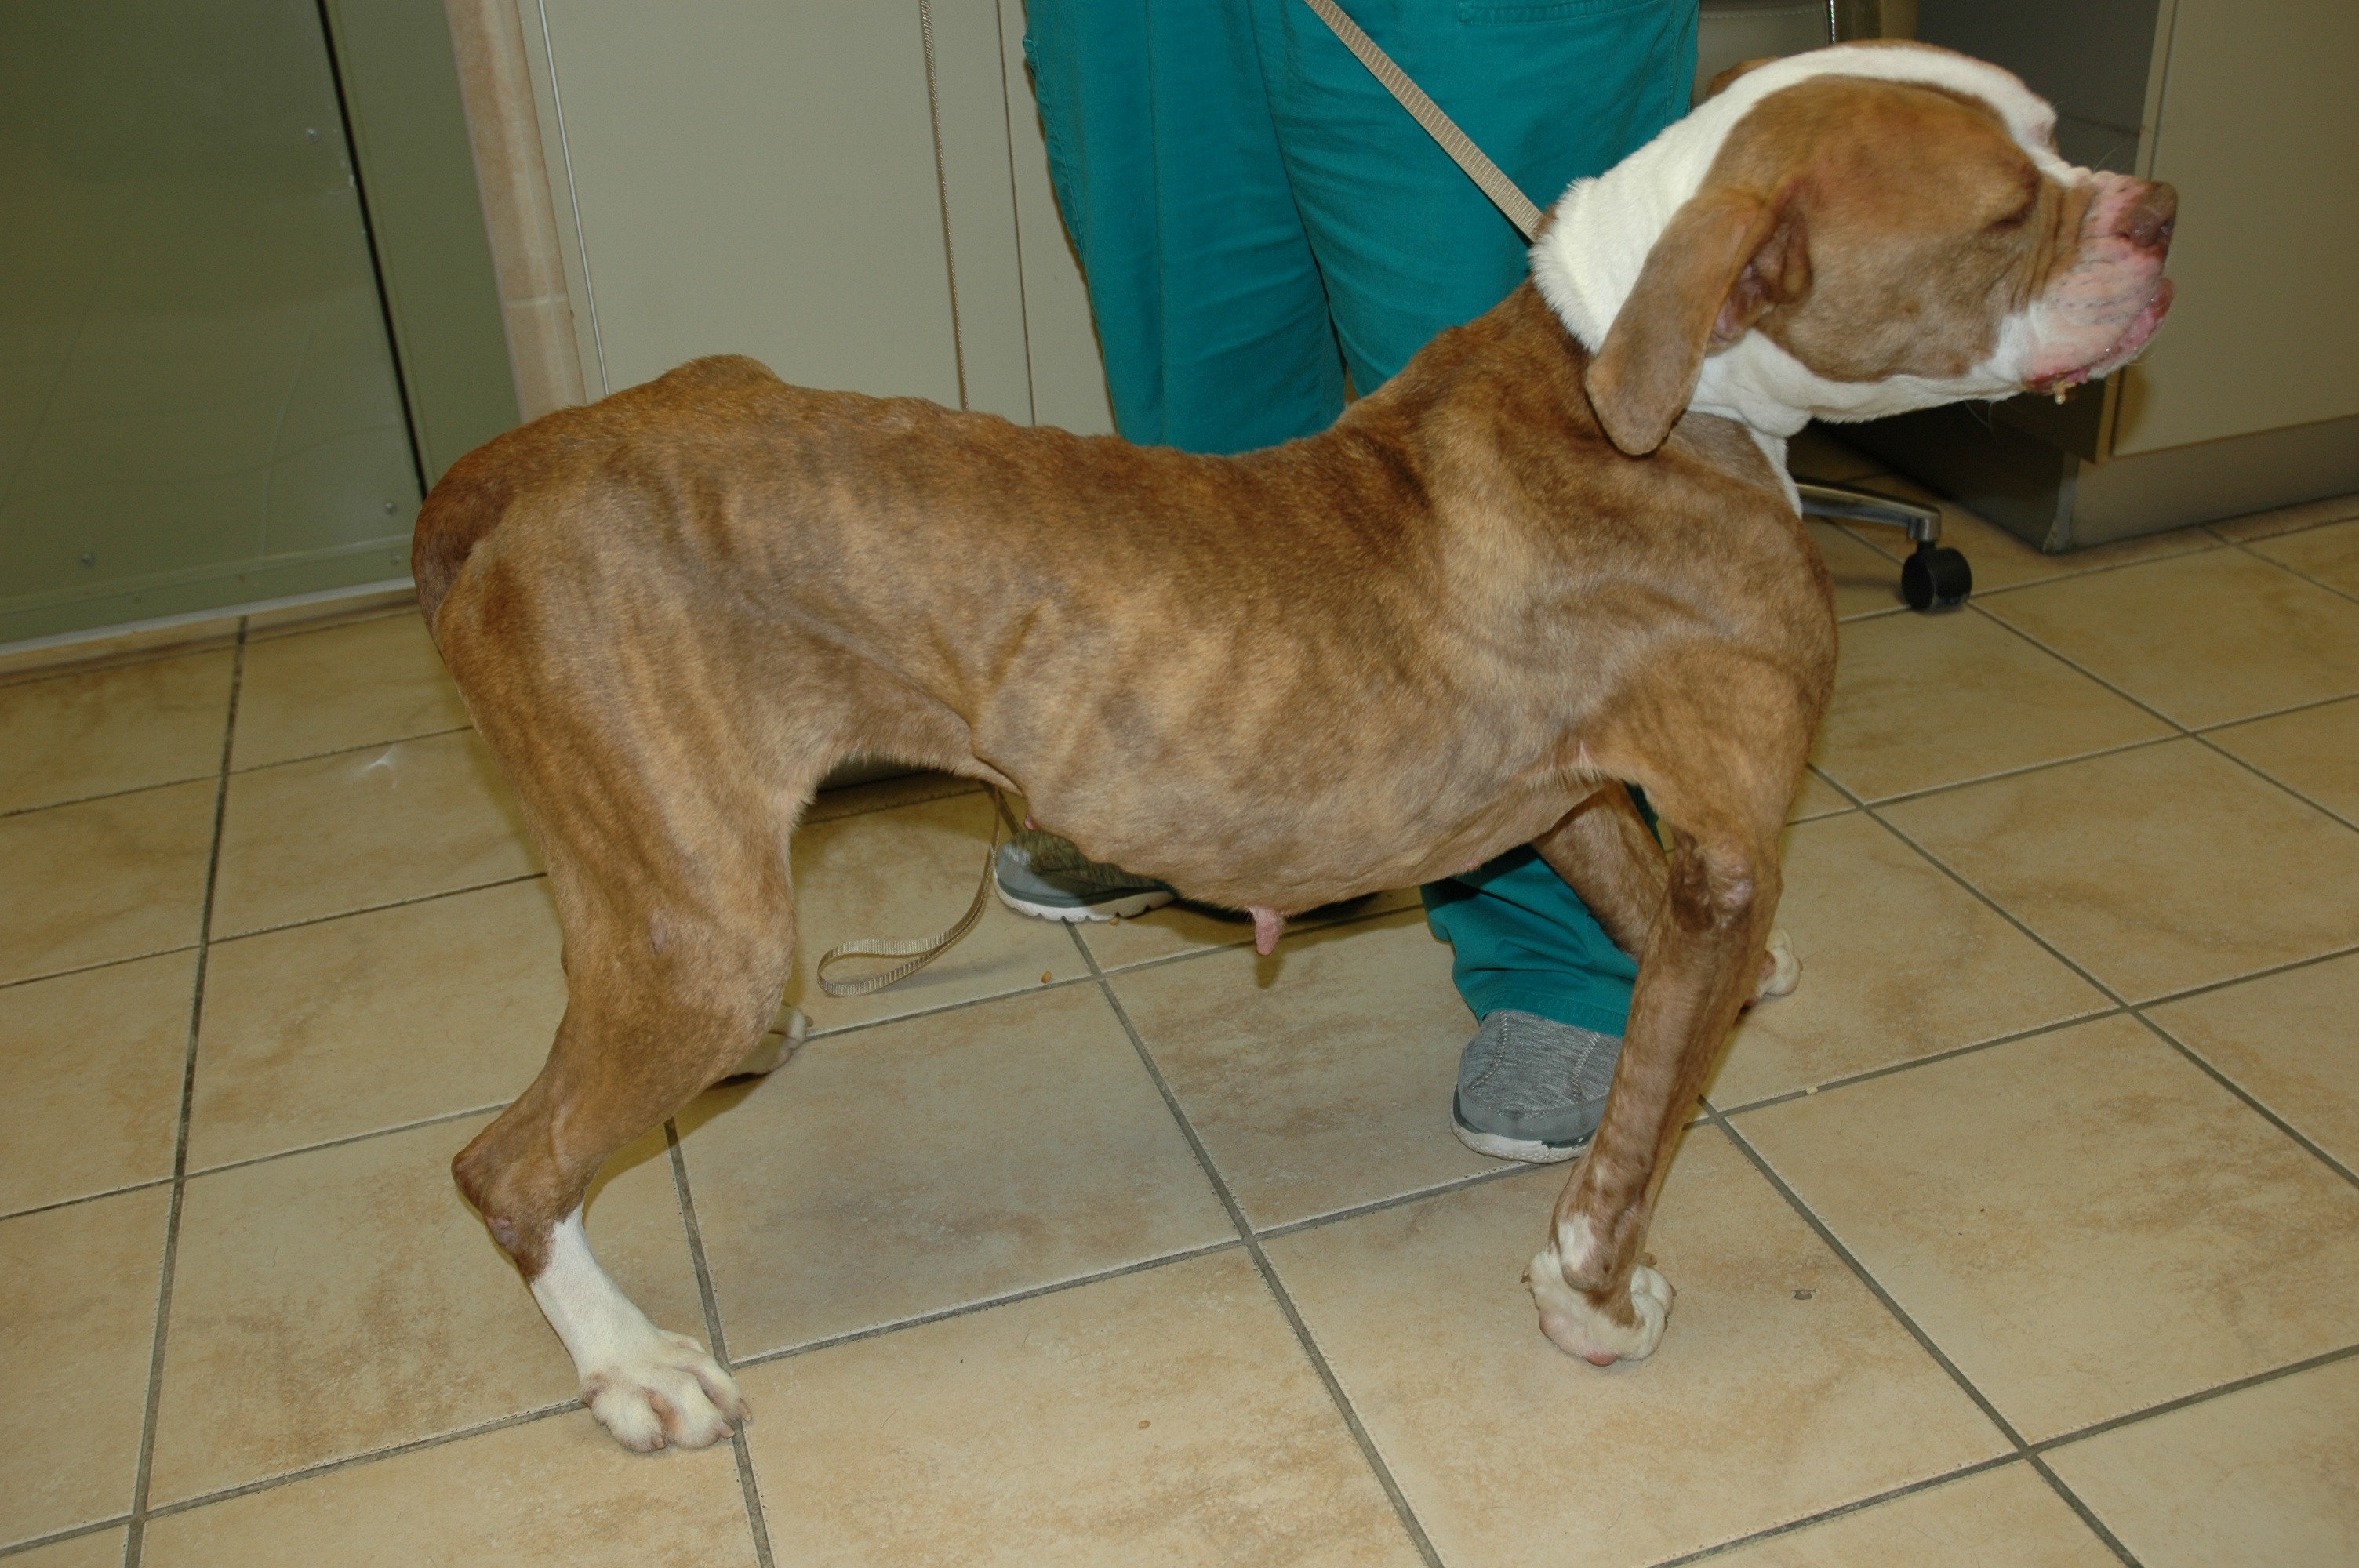 Police Open Animal Cruelty Case After Starving Dog Is Found Roaming at